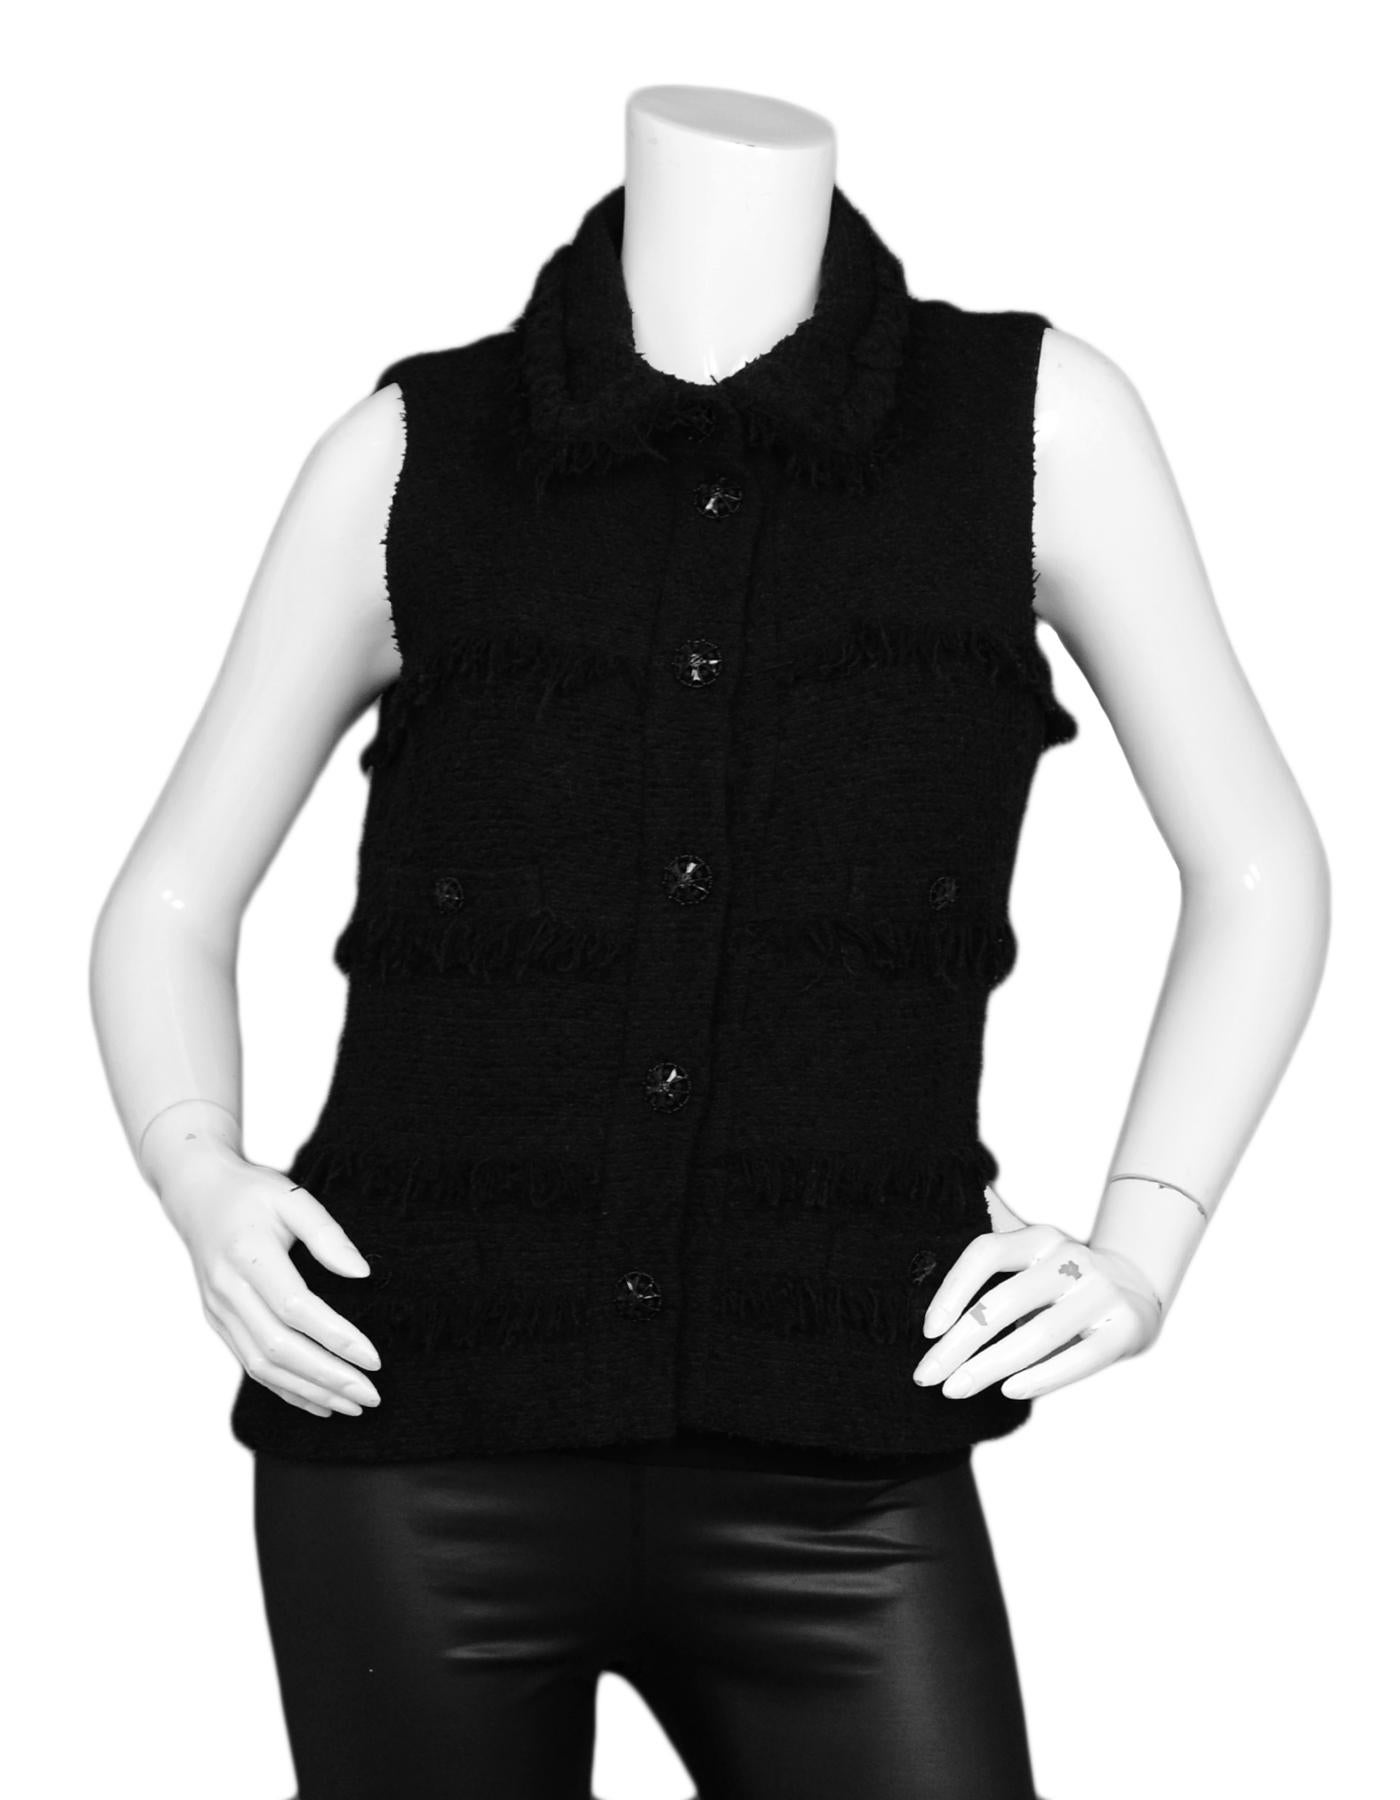 Chanel Black Wool Boucle Vest w/ Fringe sz 38

Made In: France
Year of Production: 2008
Color: Black
Materials: 37% Wool, 32% Silk, 23% Cotton, 8%Nylon
Lining: 86% Silk, 14% Spandex
Opening/Closure: Front buttons
Overall Condition: Excellent